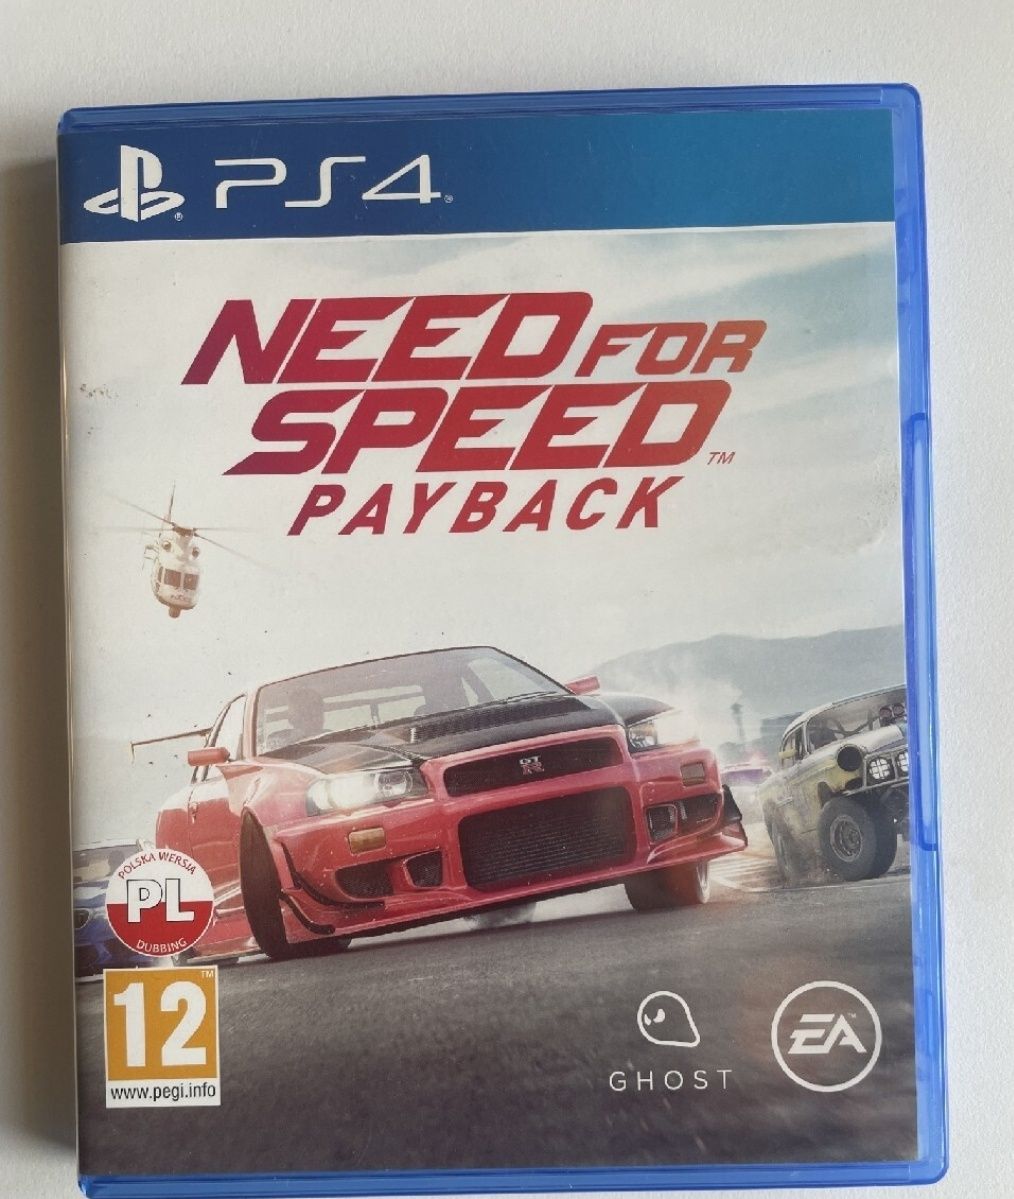 Need for speed playback ps4